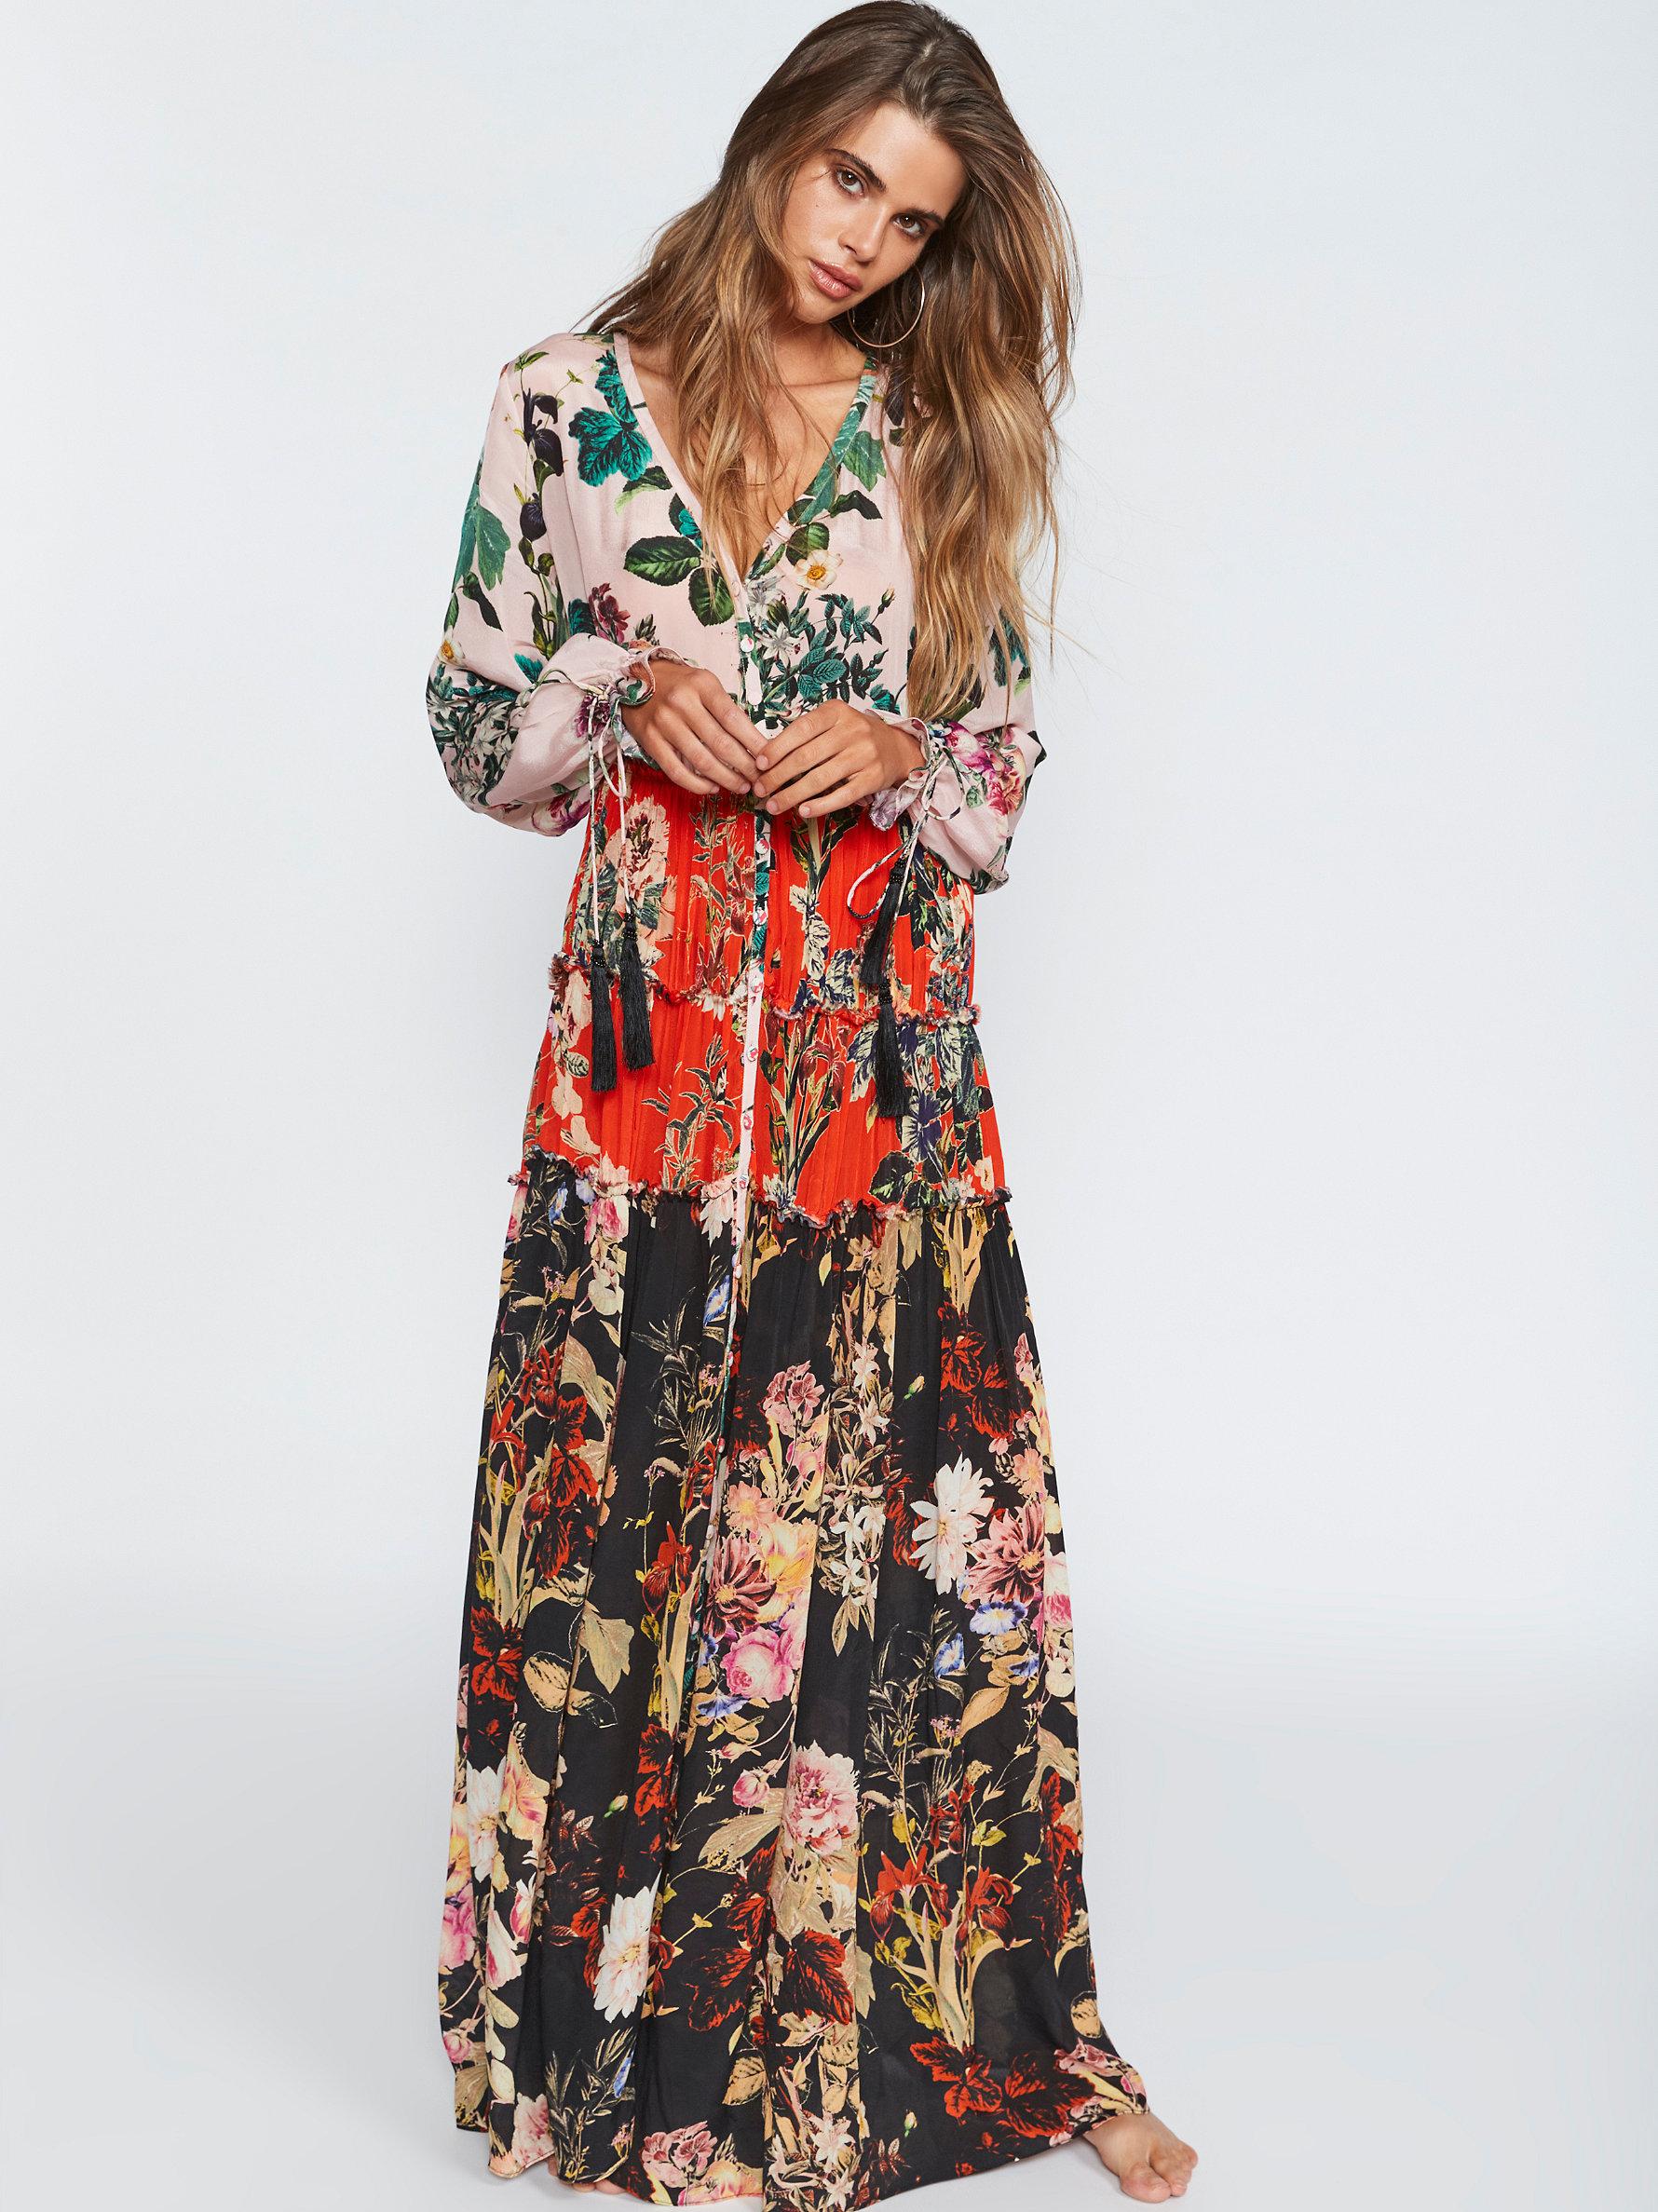 Lyst - Free People Mixed Floral Maxi Dress in Pink